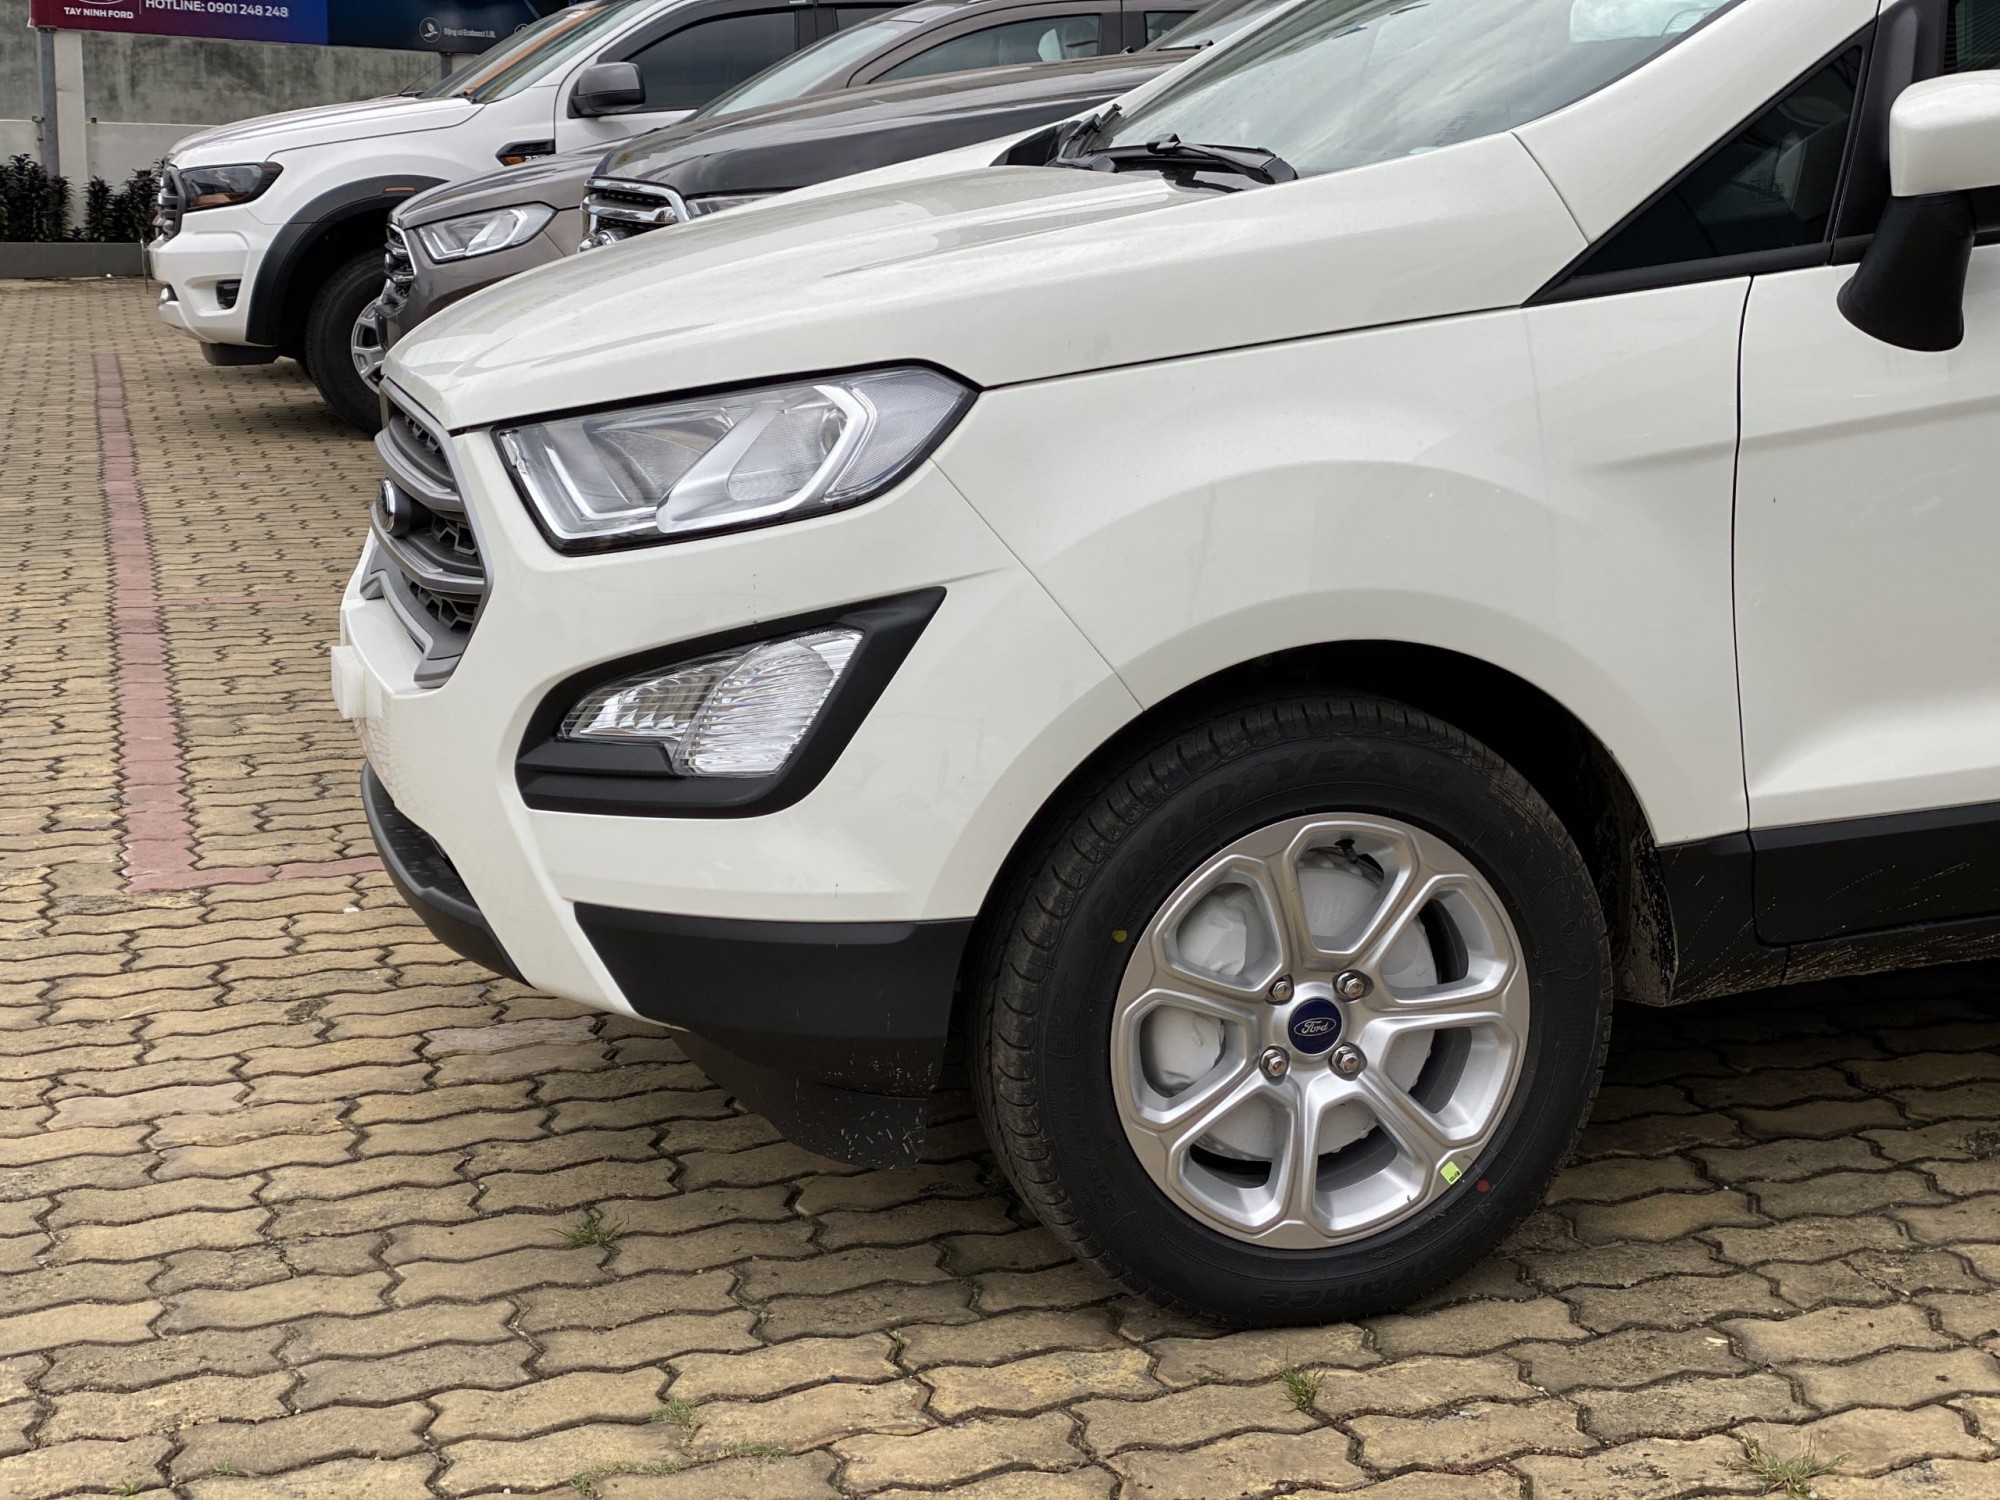 Ford ecosport tai long an ford